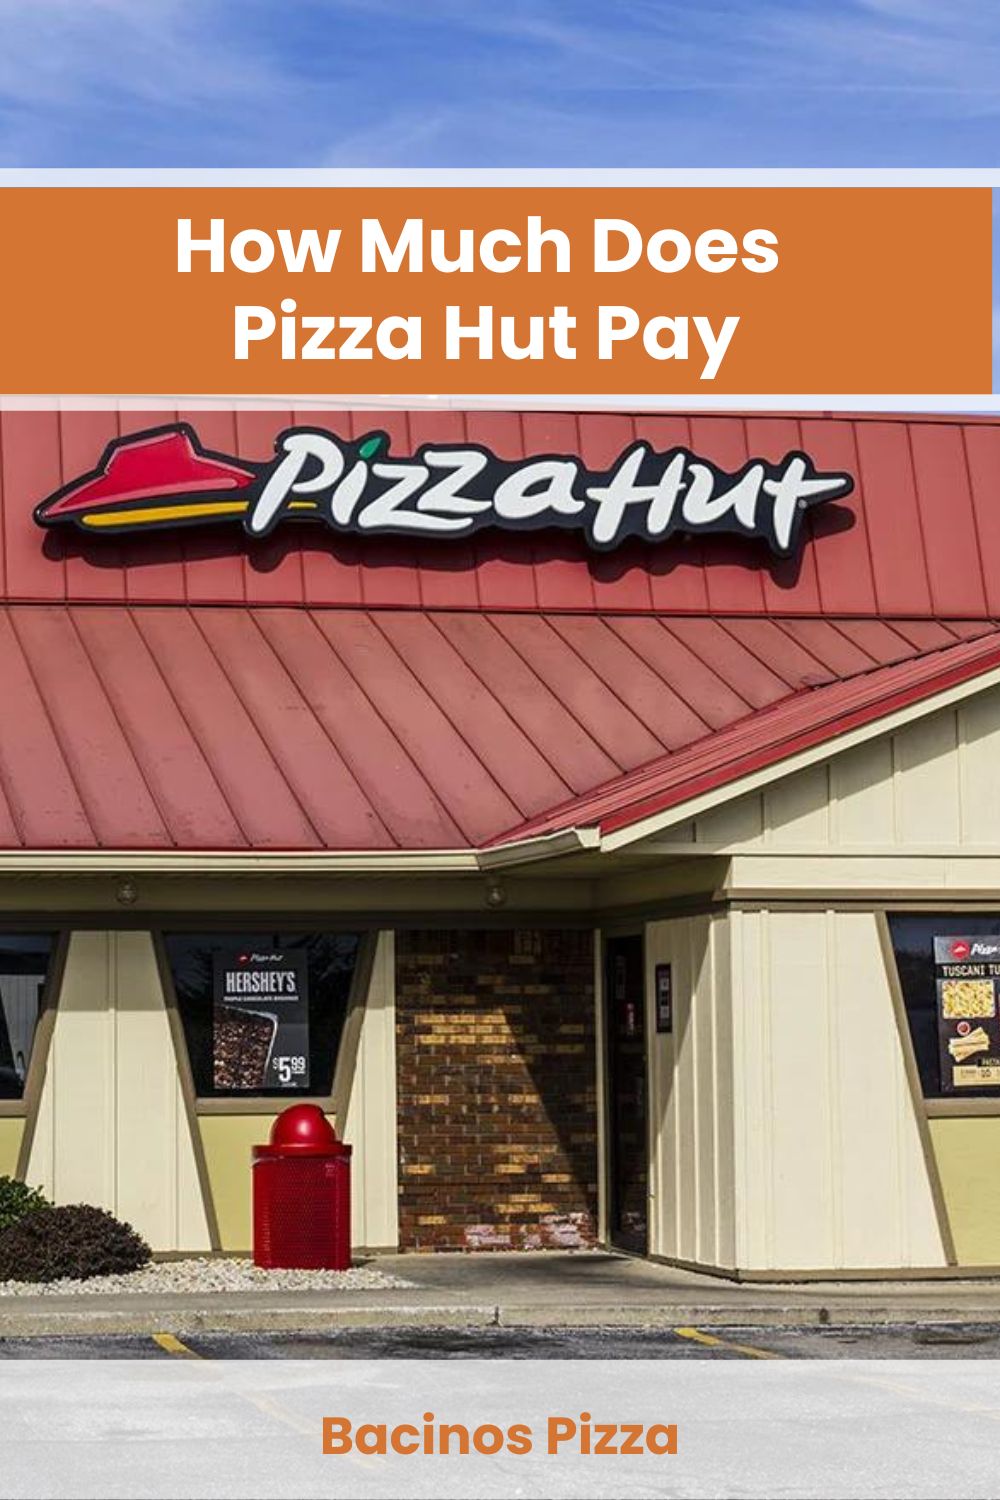 How Much Does Pizza Hut Pay